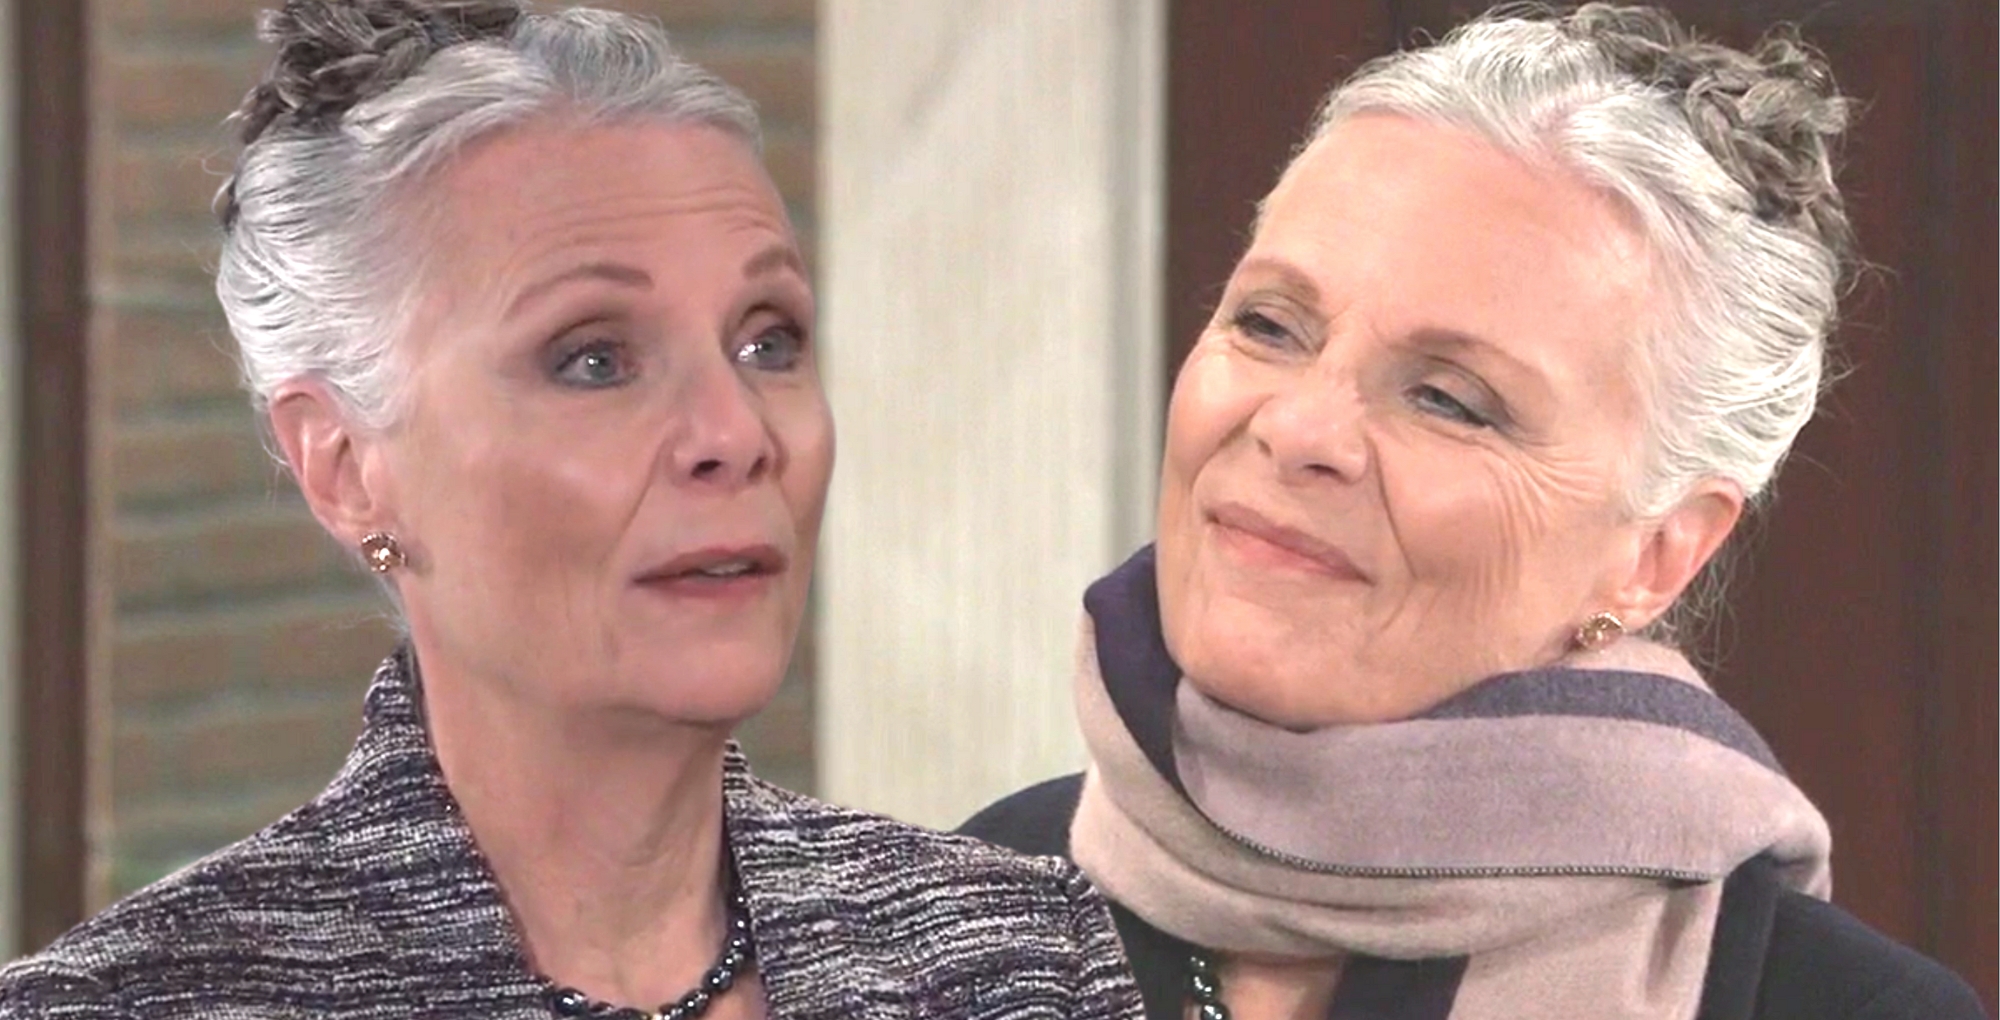 tracy quartermaine is back on general hospital, double images of her.